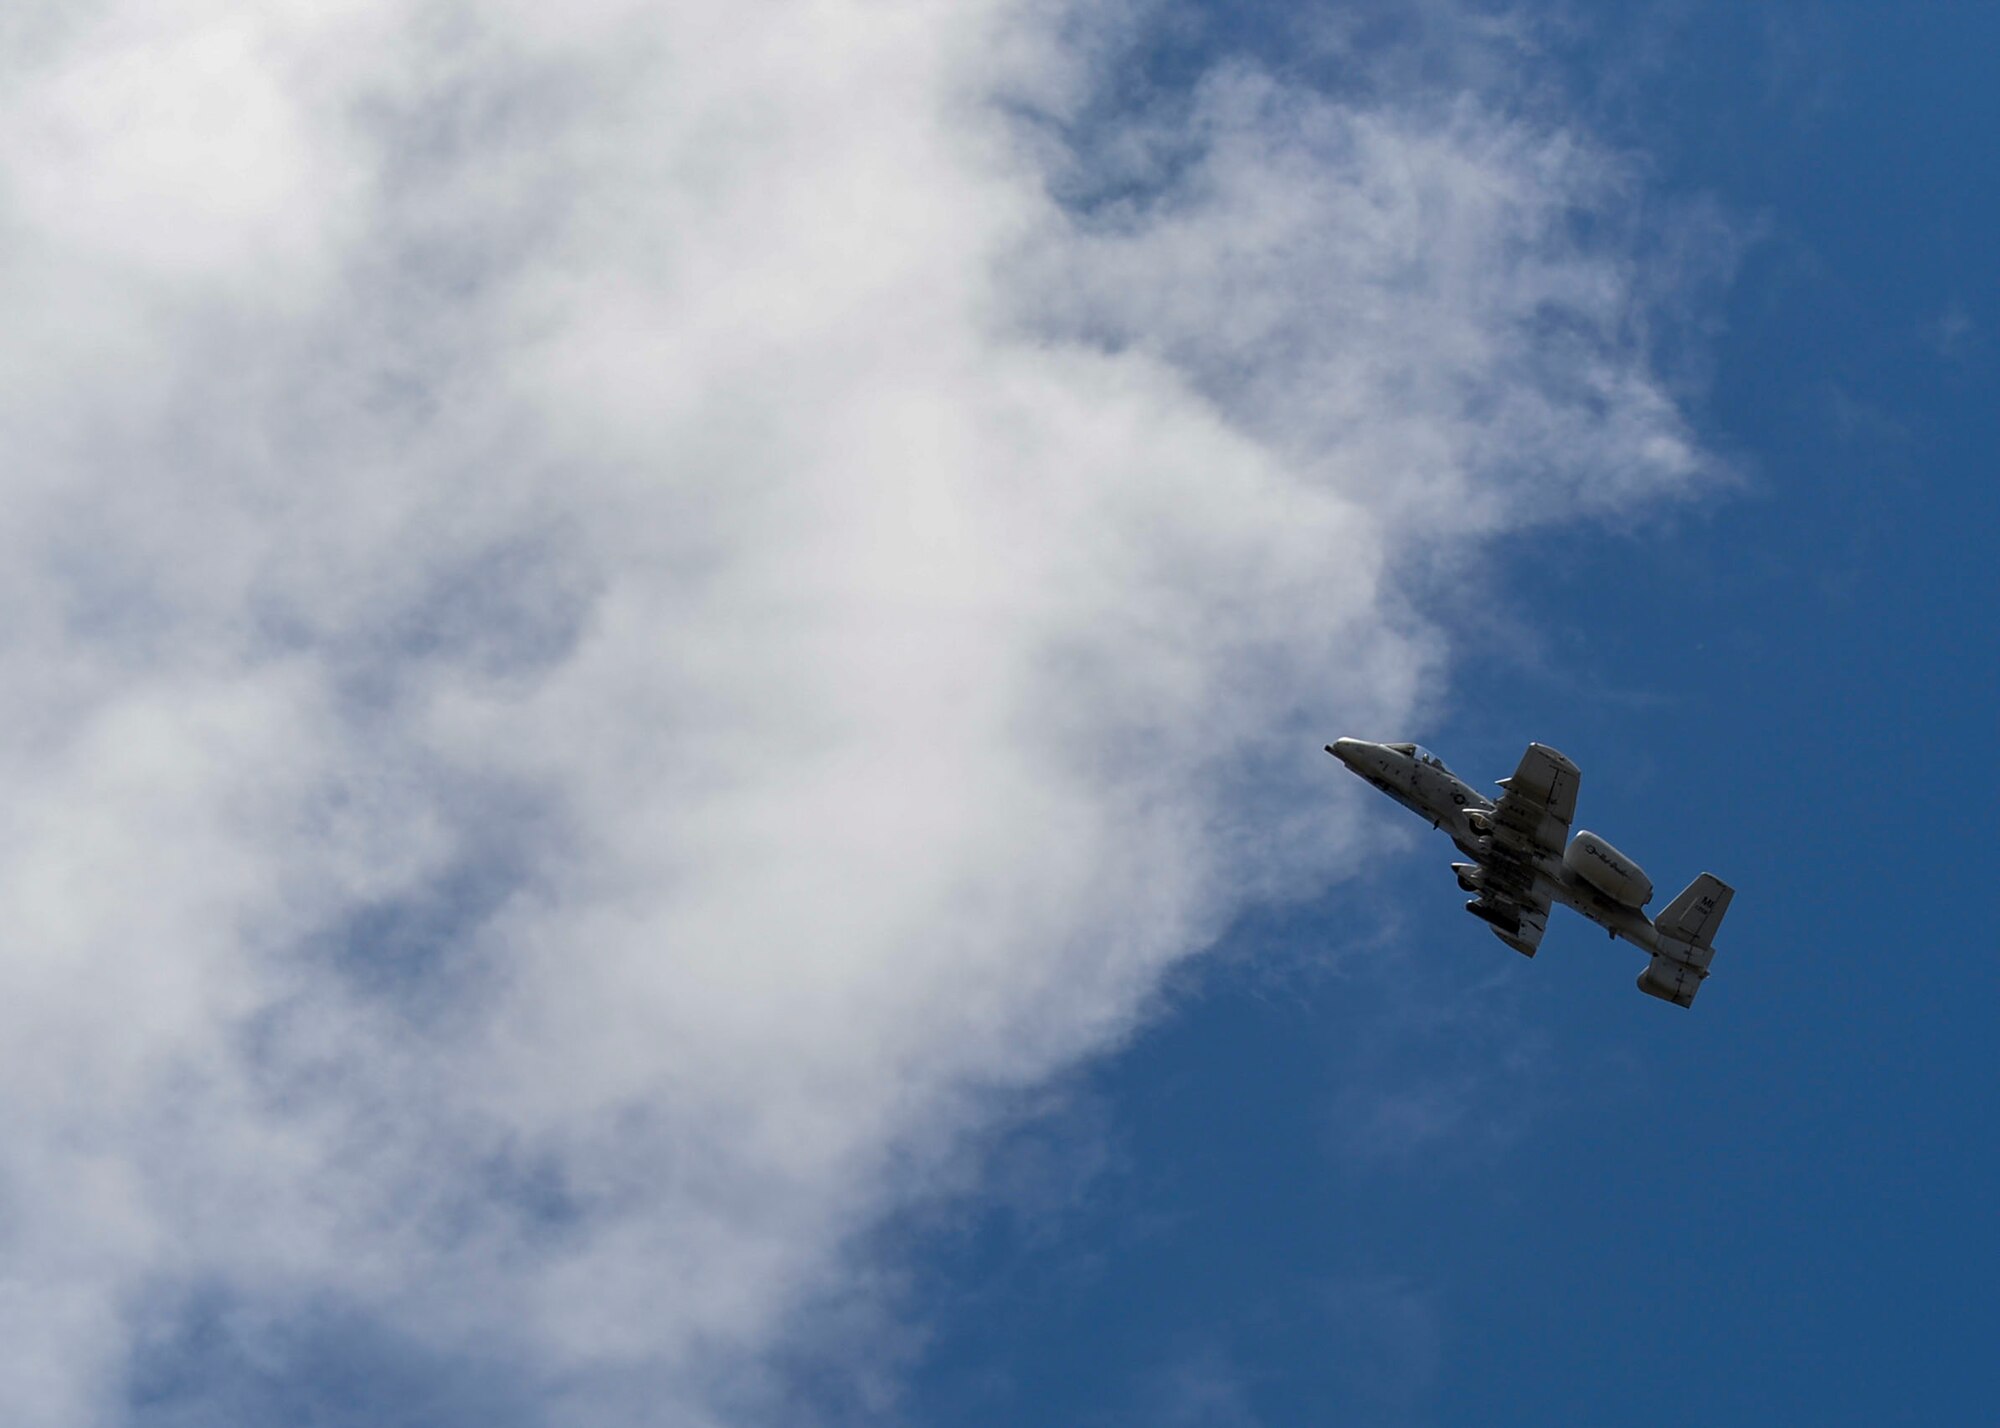 An A-10 Thunderbolt II flies over a field in Adazi, Latvia, June 5, 2018.  A-10s were deployed to Europe from the 127th Wing at Selfridge Air National Guard Base, Michigan, to support exercise Saber Strike 18. While flying, A-10 pilots worked on close air support tactics and demonstrated show-of-force maneuvers. (U.S. Air Force photo by Staff Sgt. Jimmie D. Pike)